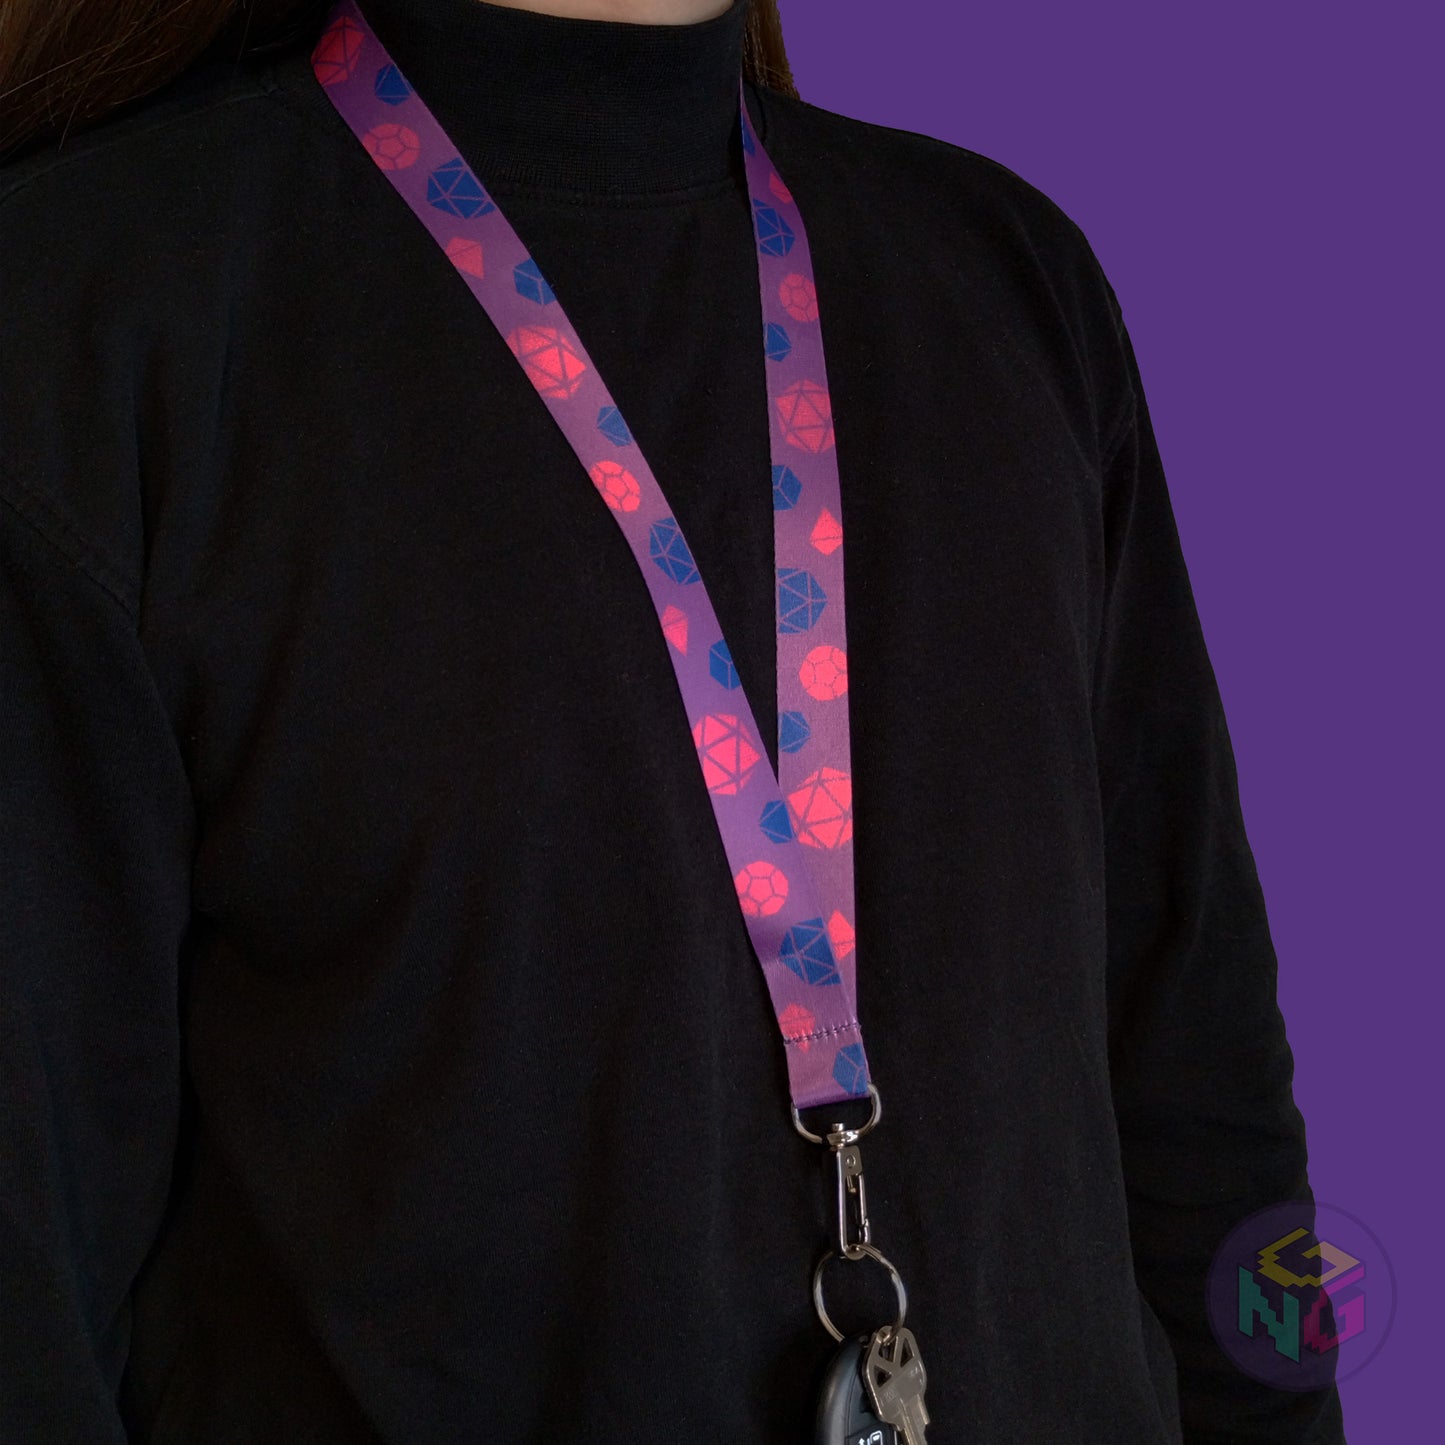 purple bisexual pride lanyard being worn by a flat chested person wearing a black turtleneck. The end of the lanyard falls between their sternum and bellybutton and has a key fob clipped to the end